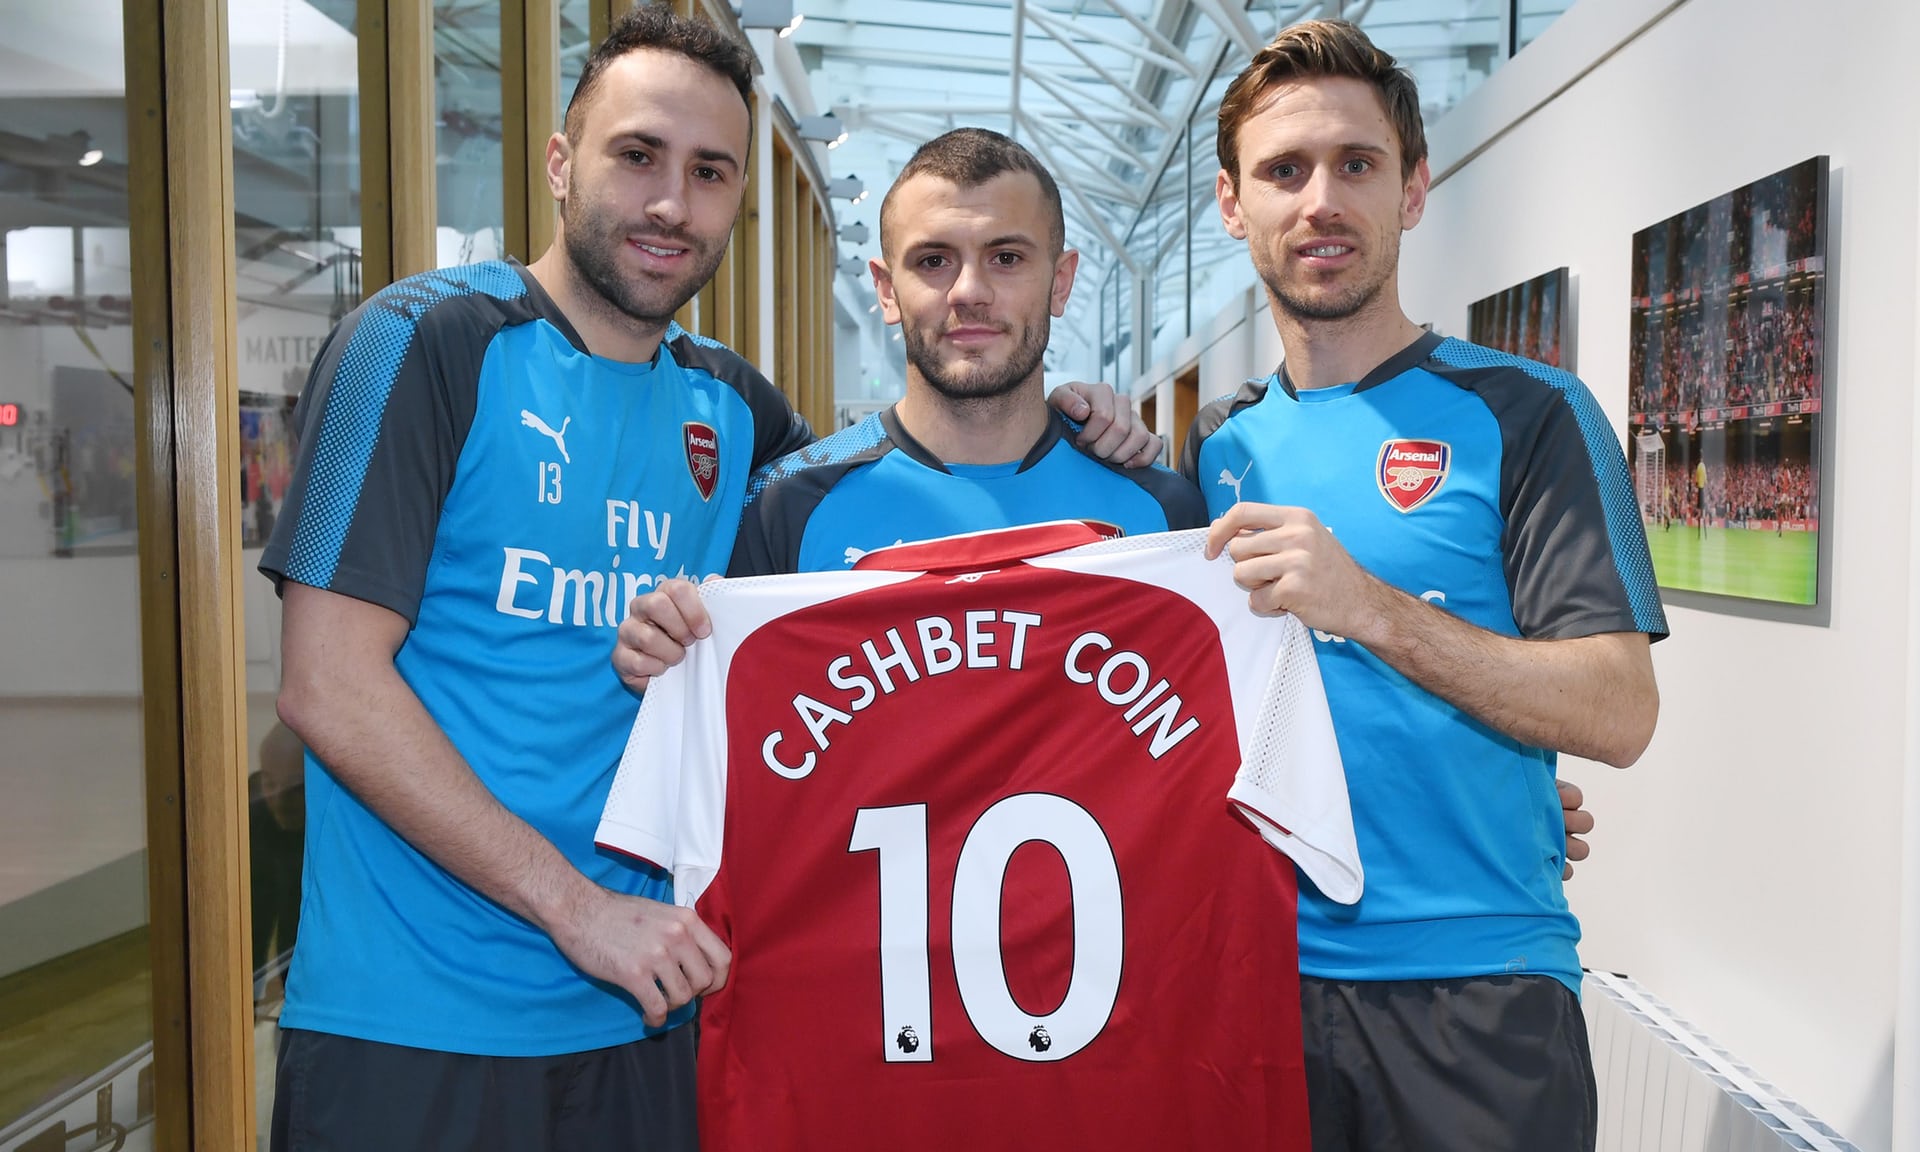 Arsenal FC Just Announced A Sponsorship Deal With CashBet